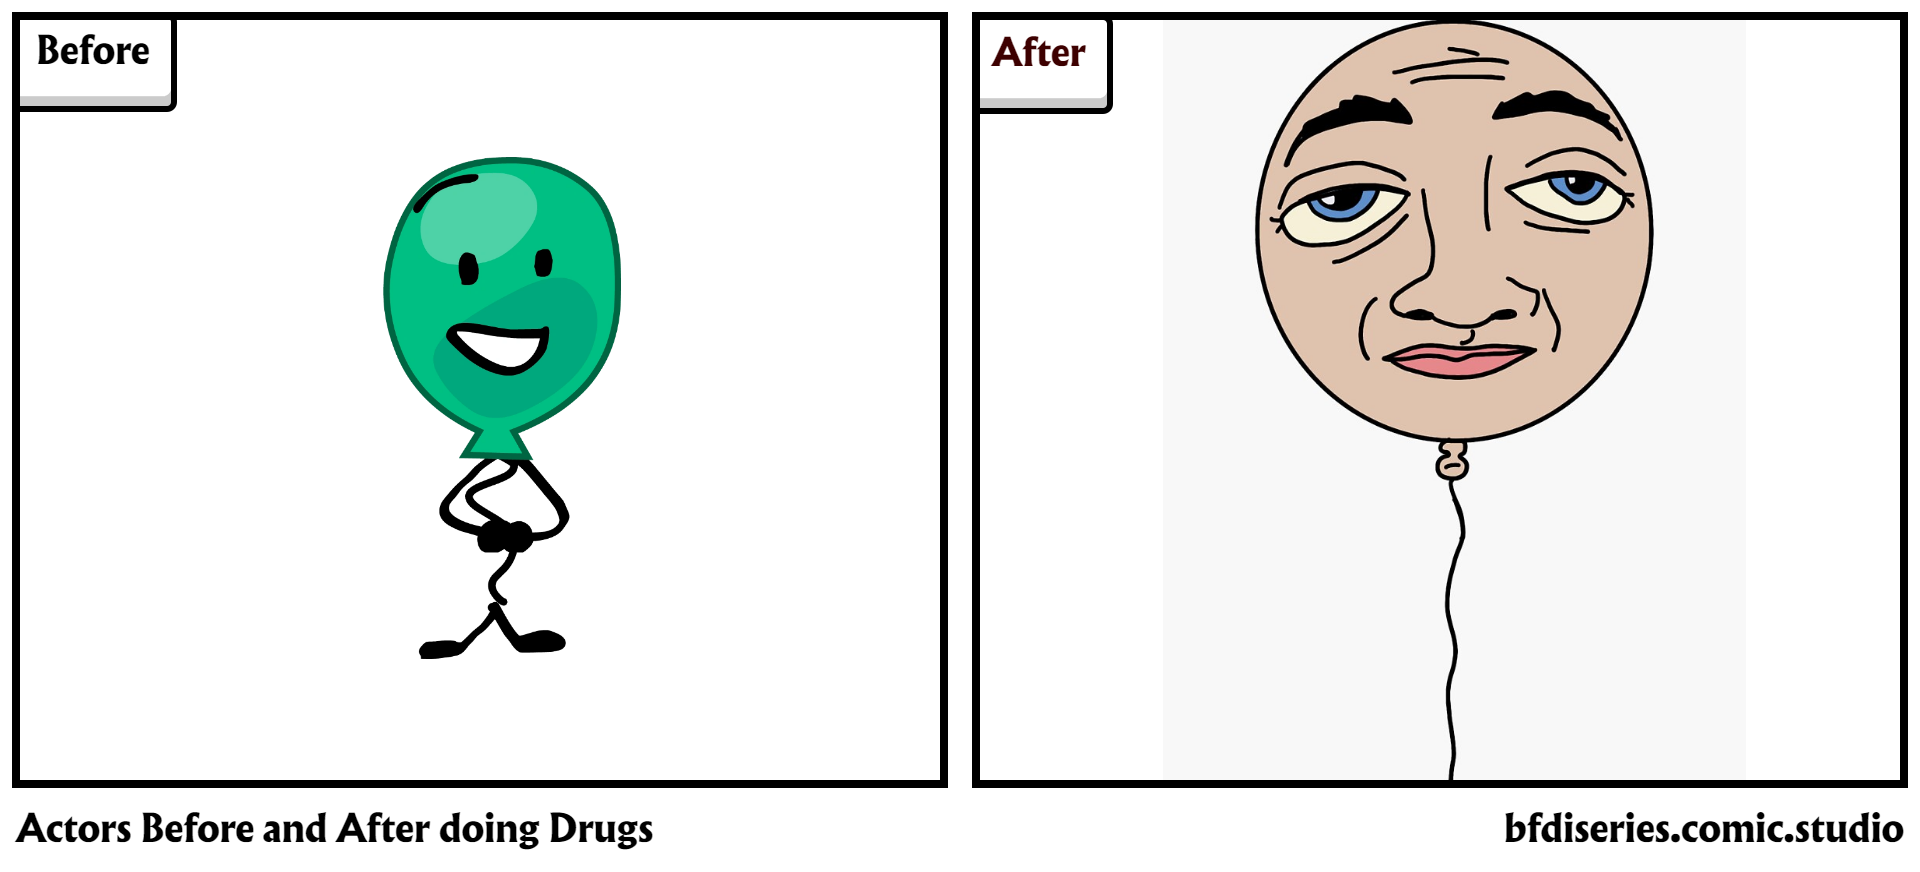 Actors Before and After doing Drugs